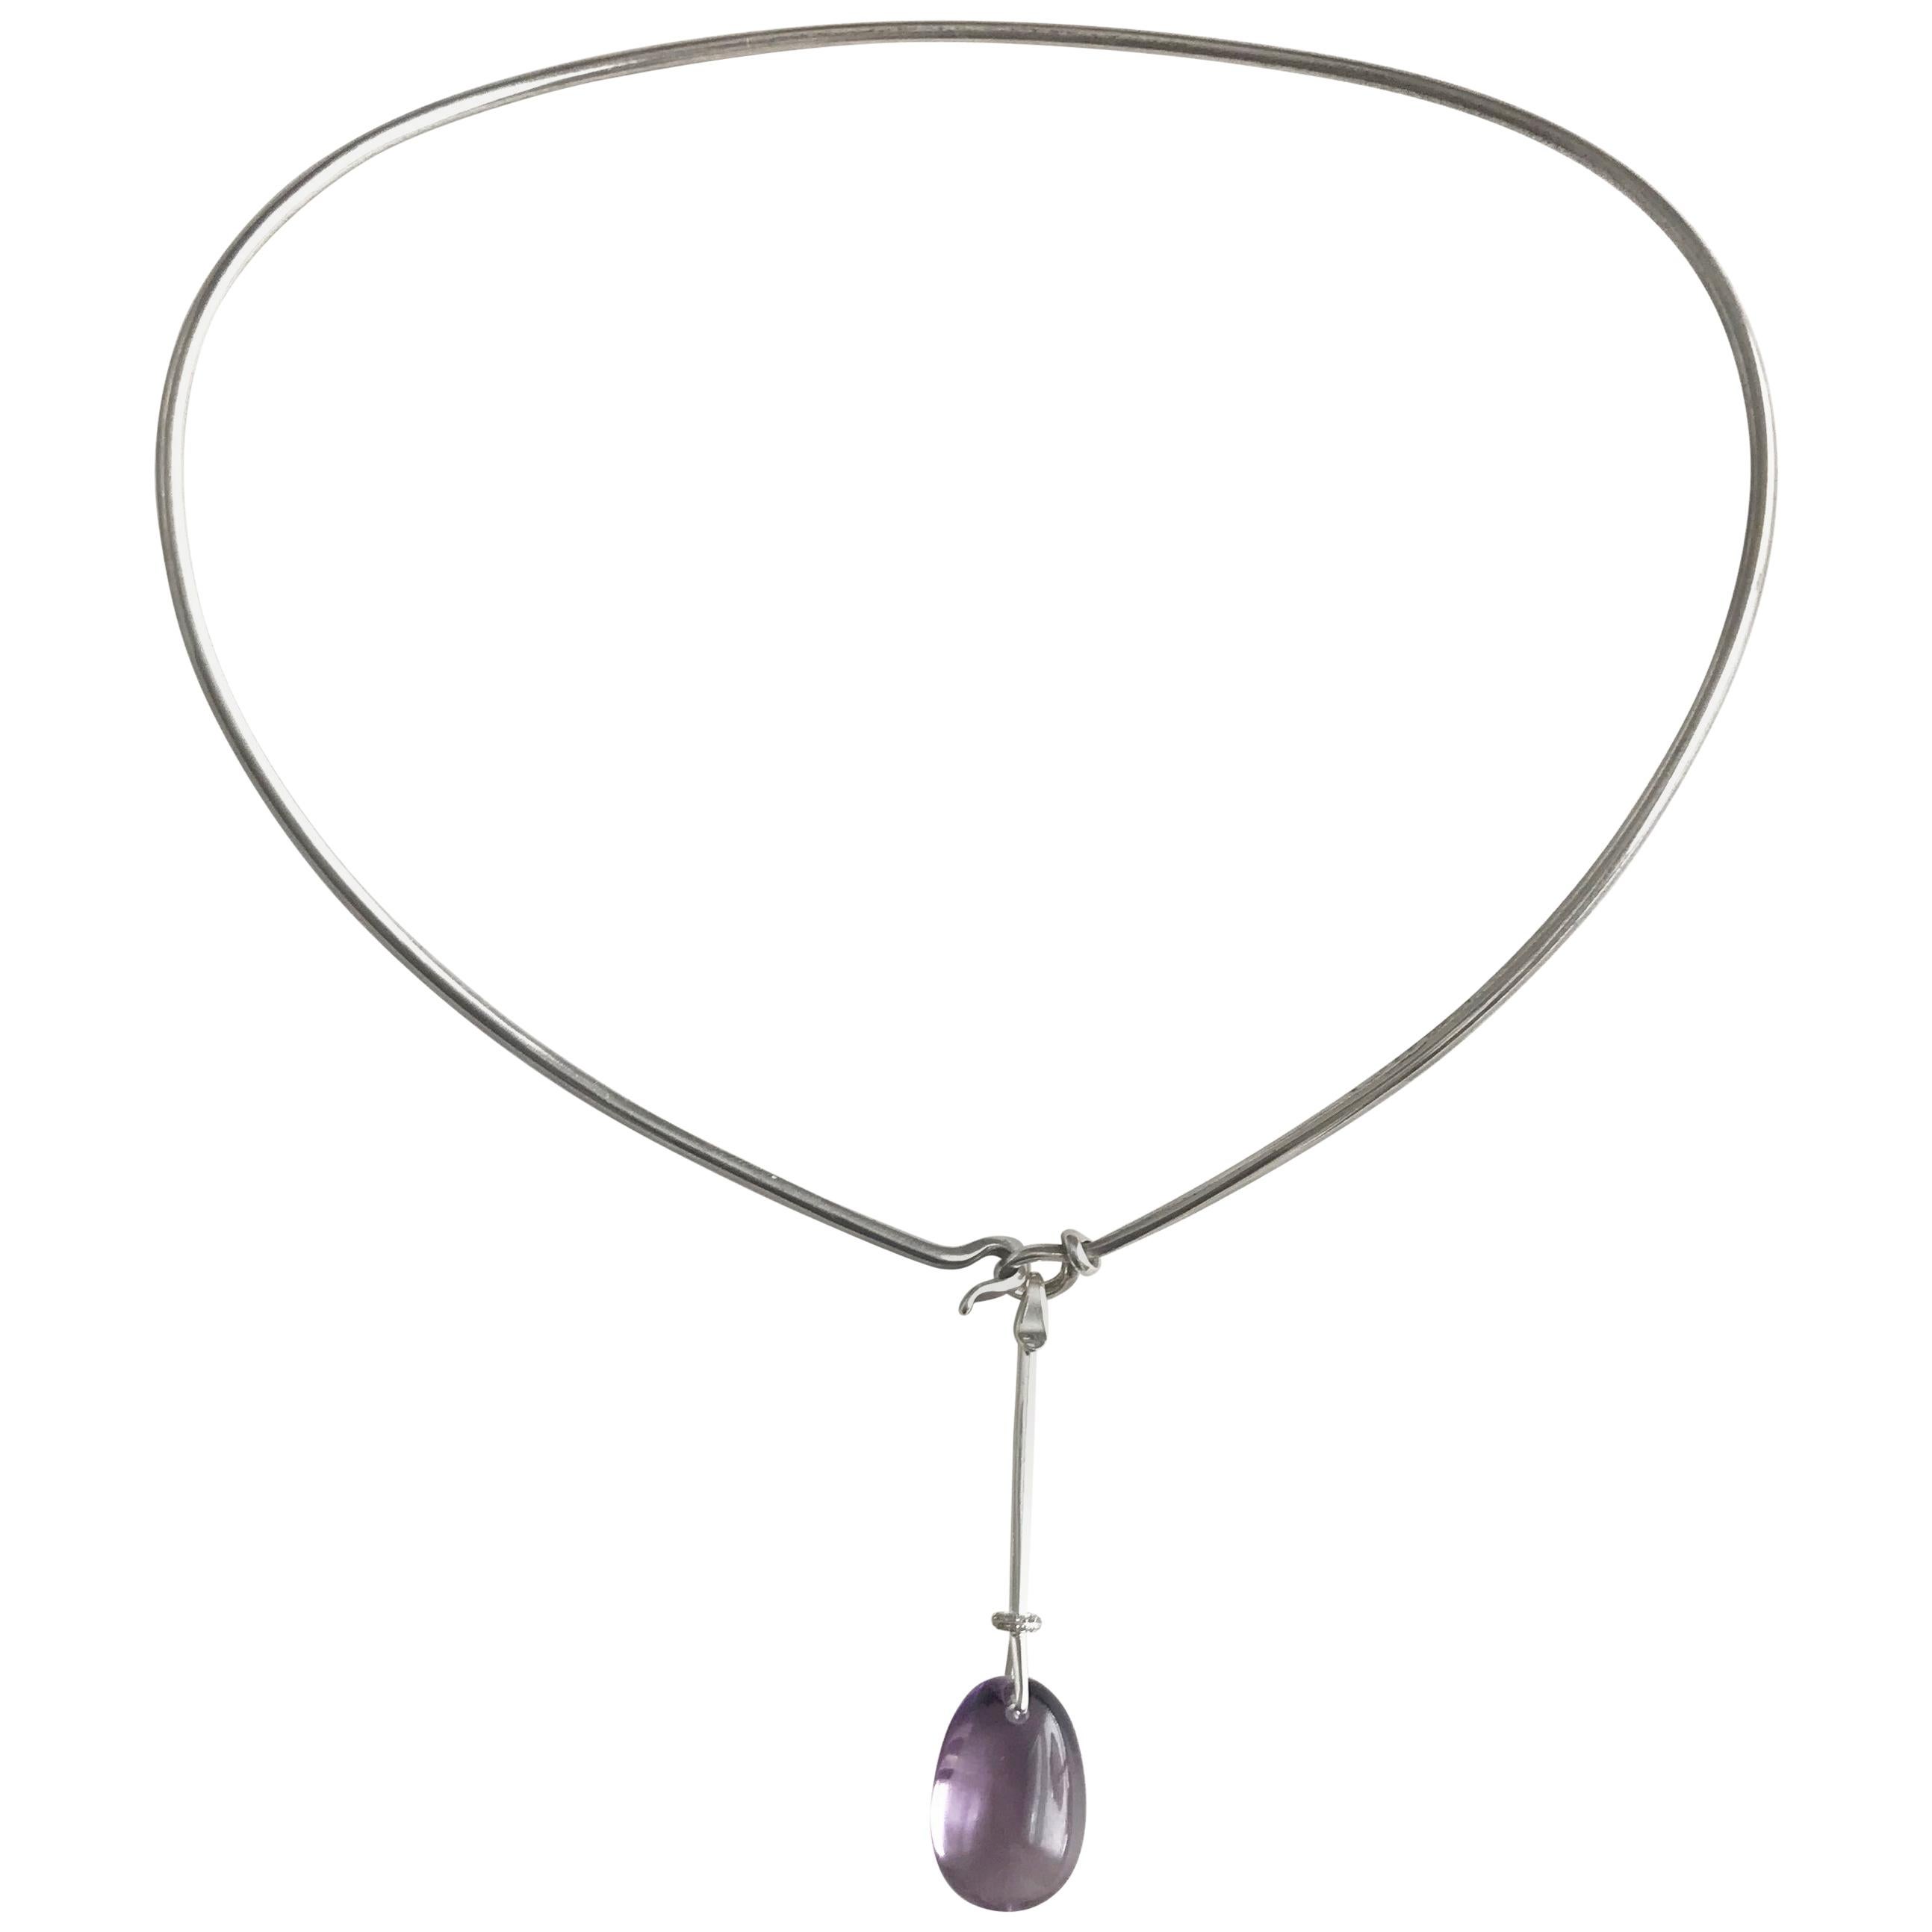 Georg Jensen Sterling Silver Neckring No. 174 and "Dewdrop" Pendant w/ Amethyst For Sale